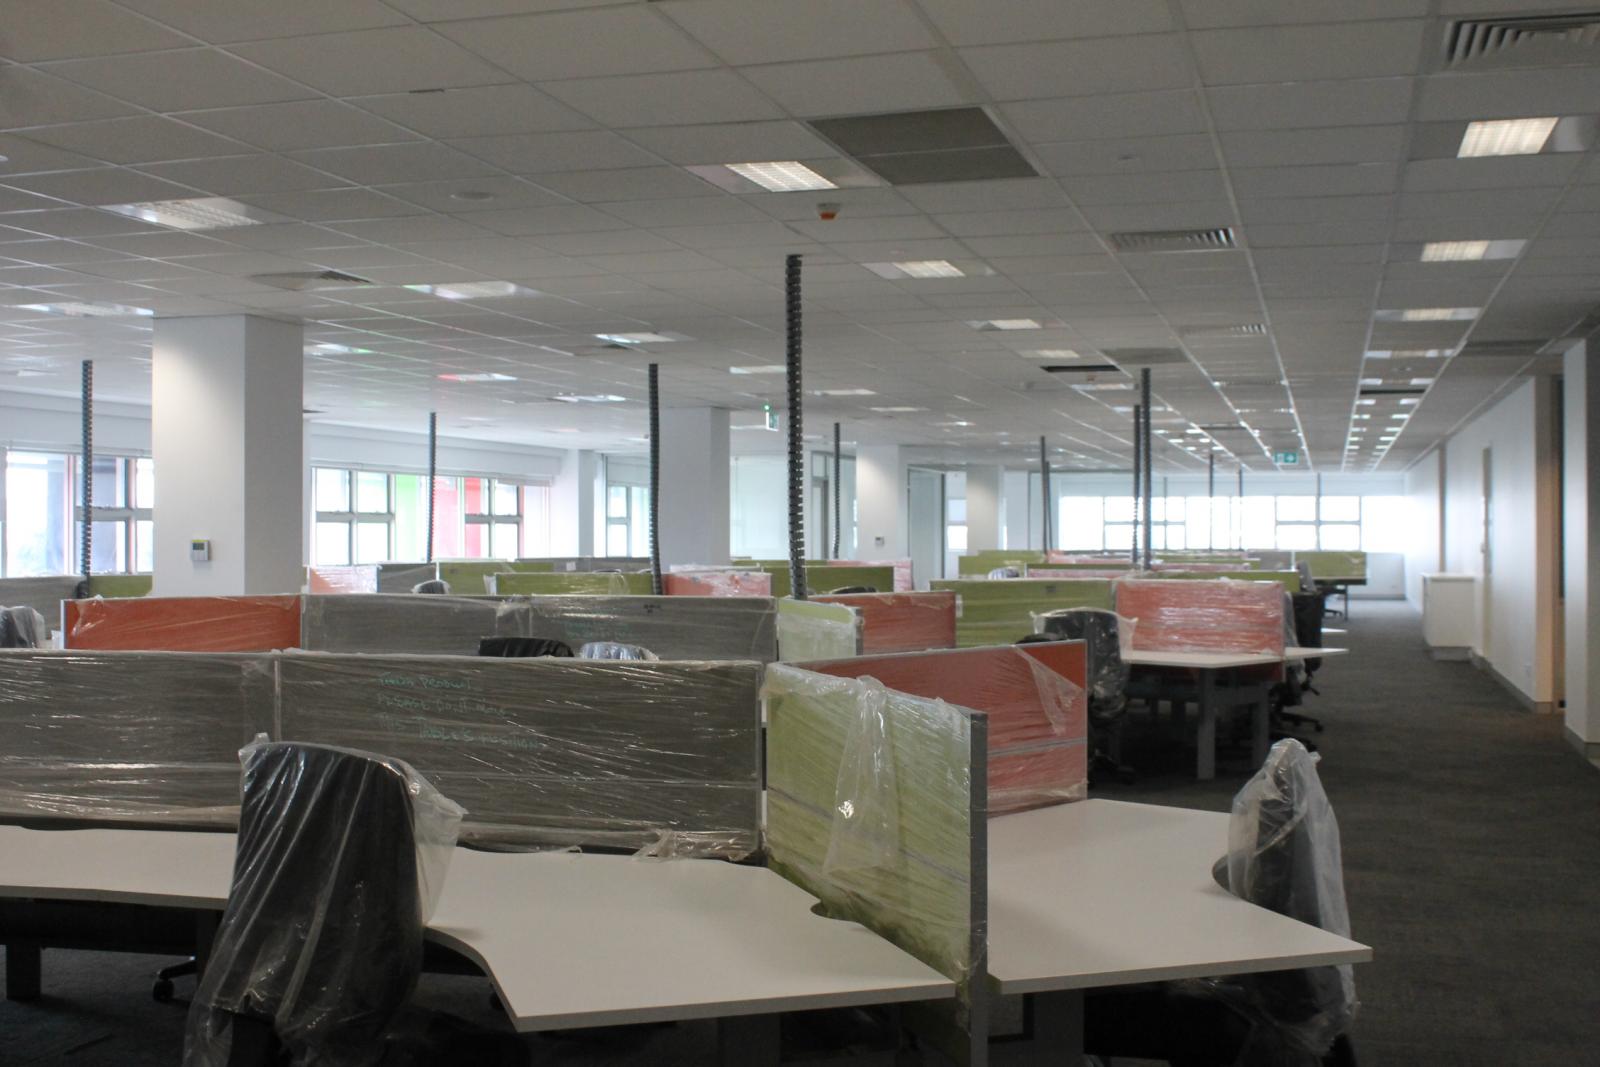 Workstations on one of the floors of the building